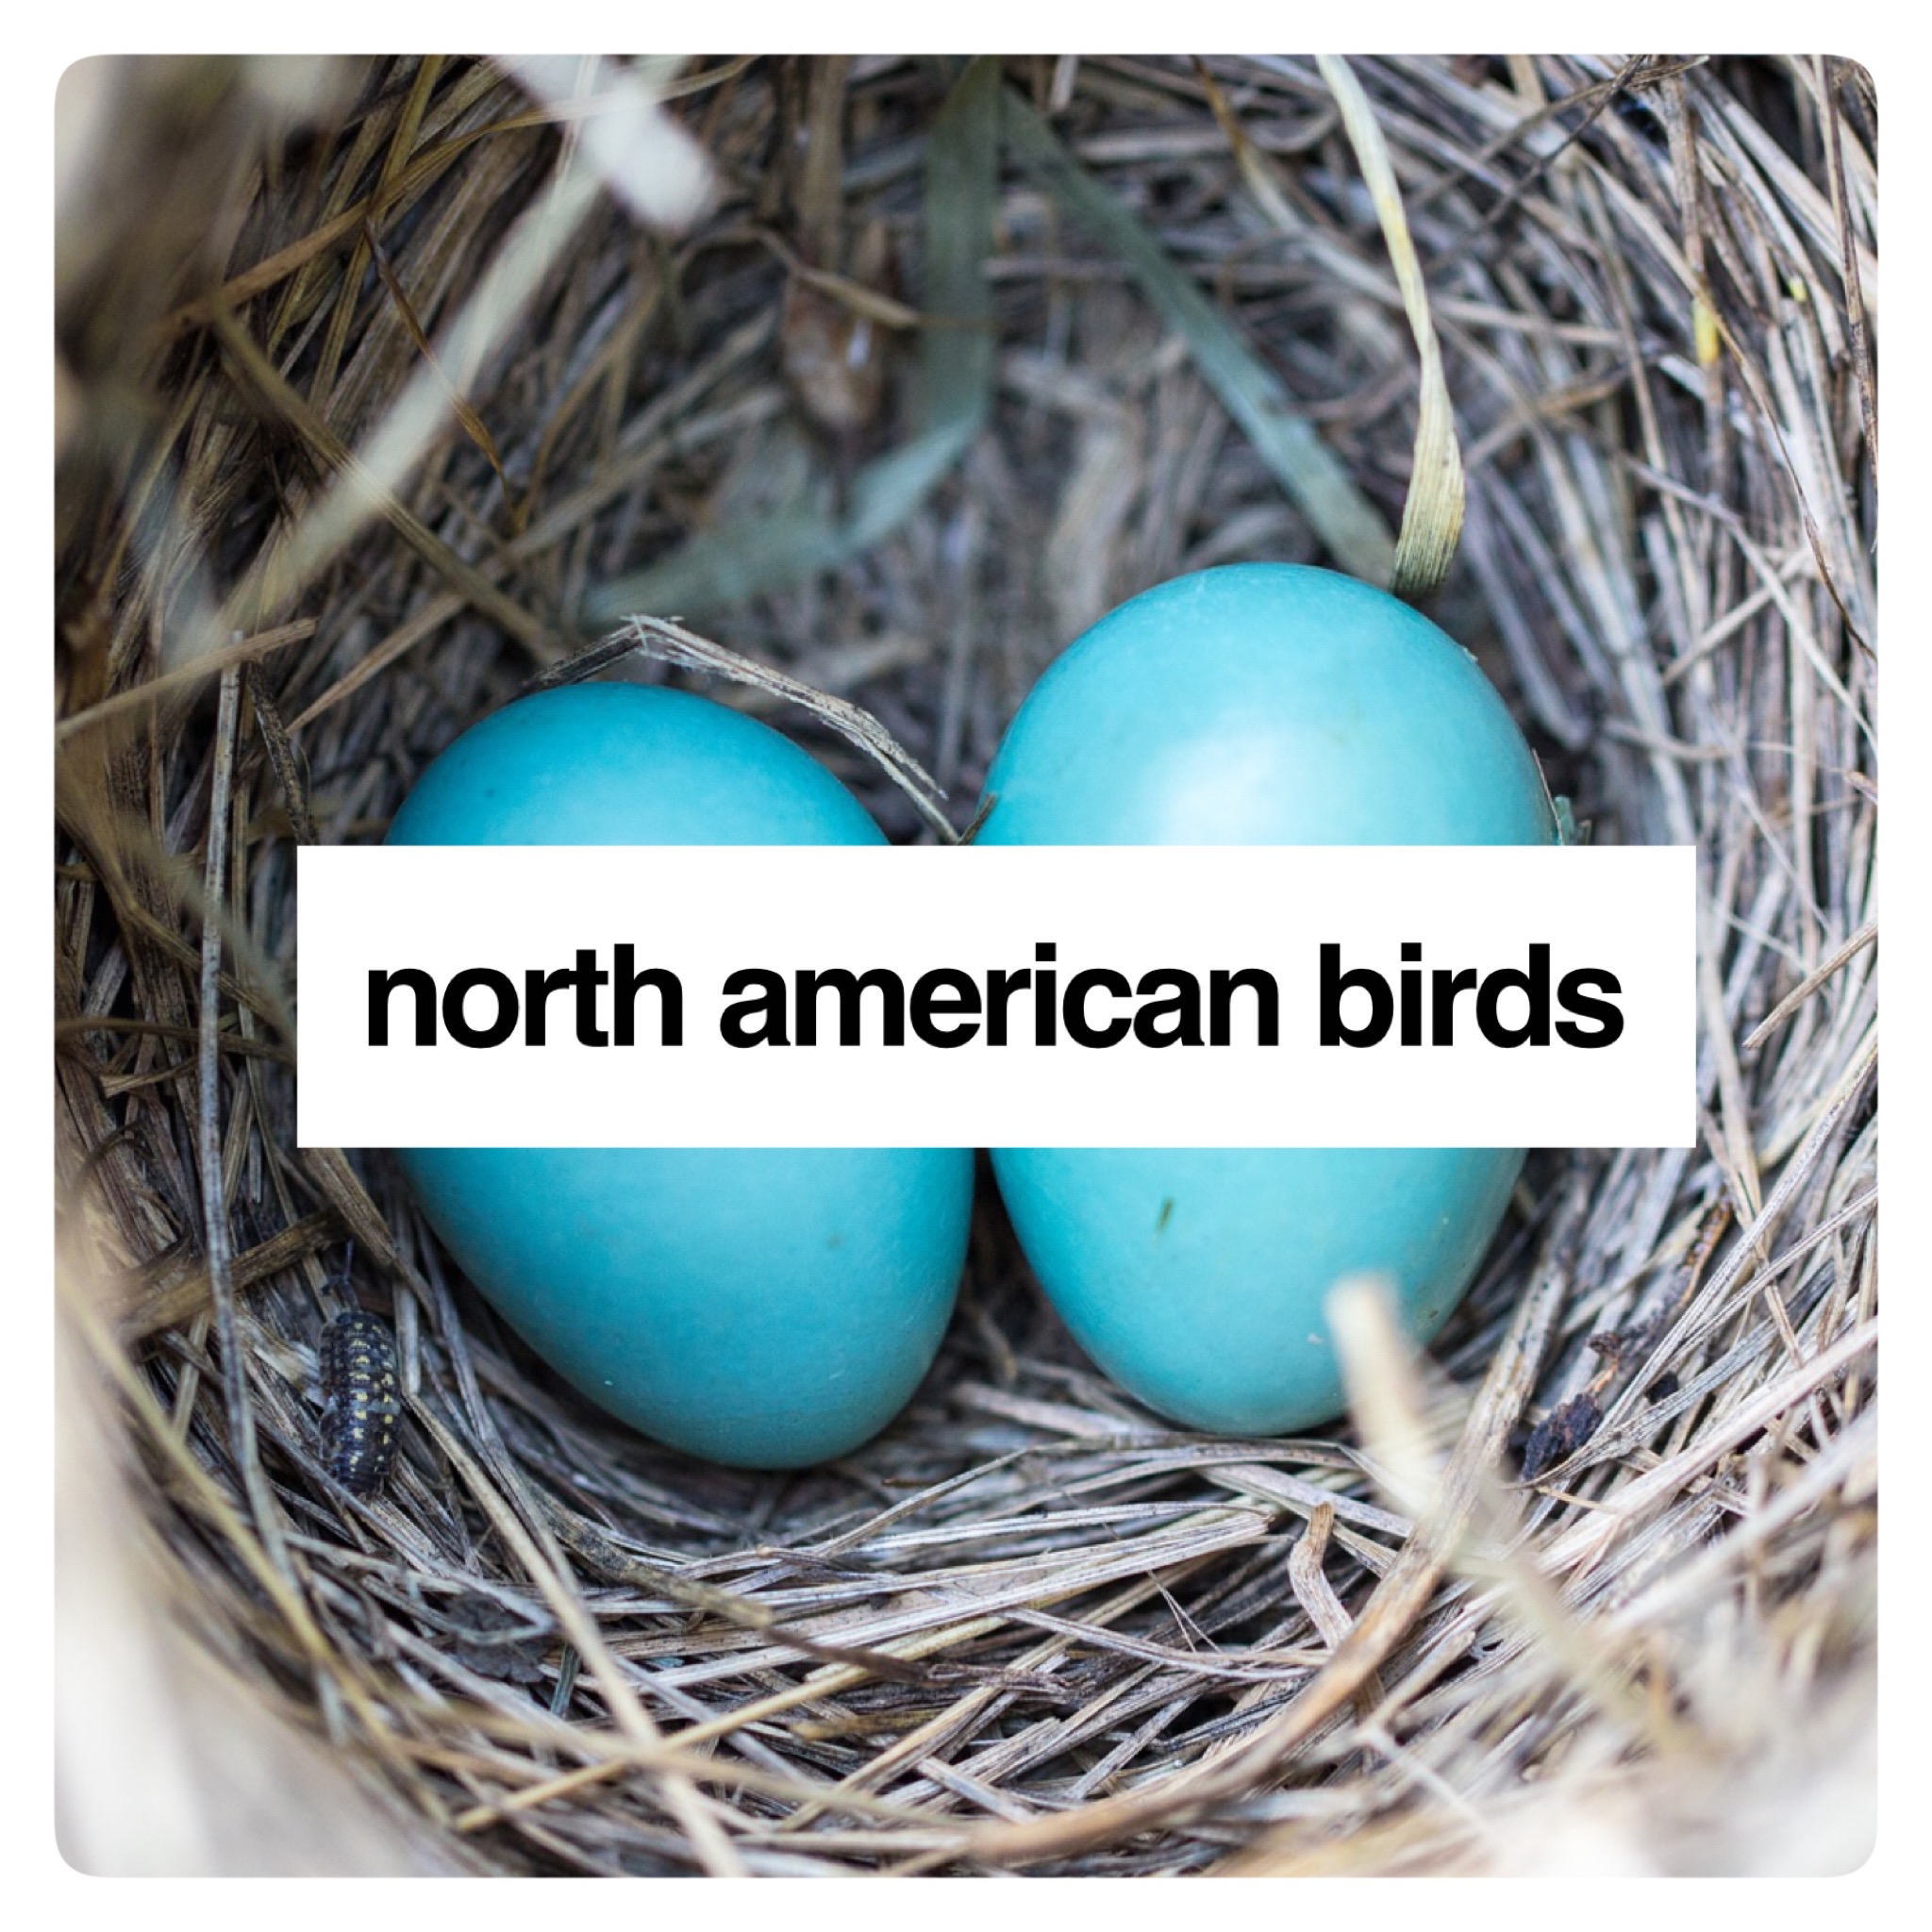 Follow along as we study North American Birds in our homeschool room. For early and upper elementary. We will be covering Language Arts, Social Studies, Geography, and even Art.